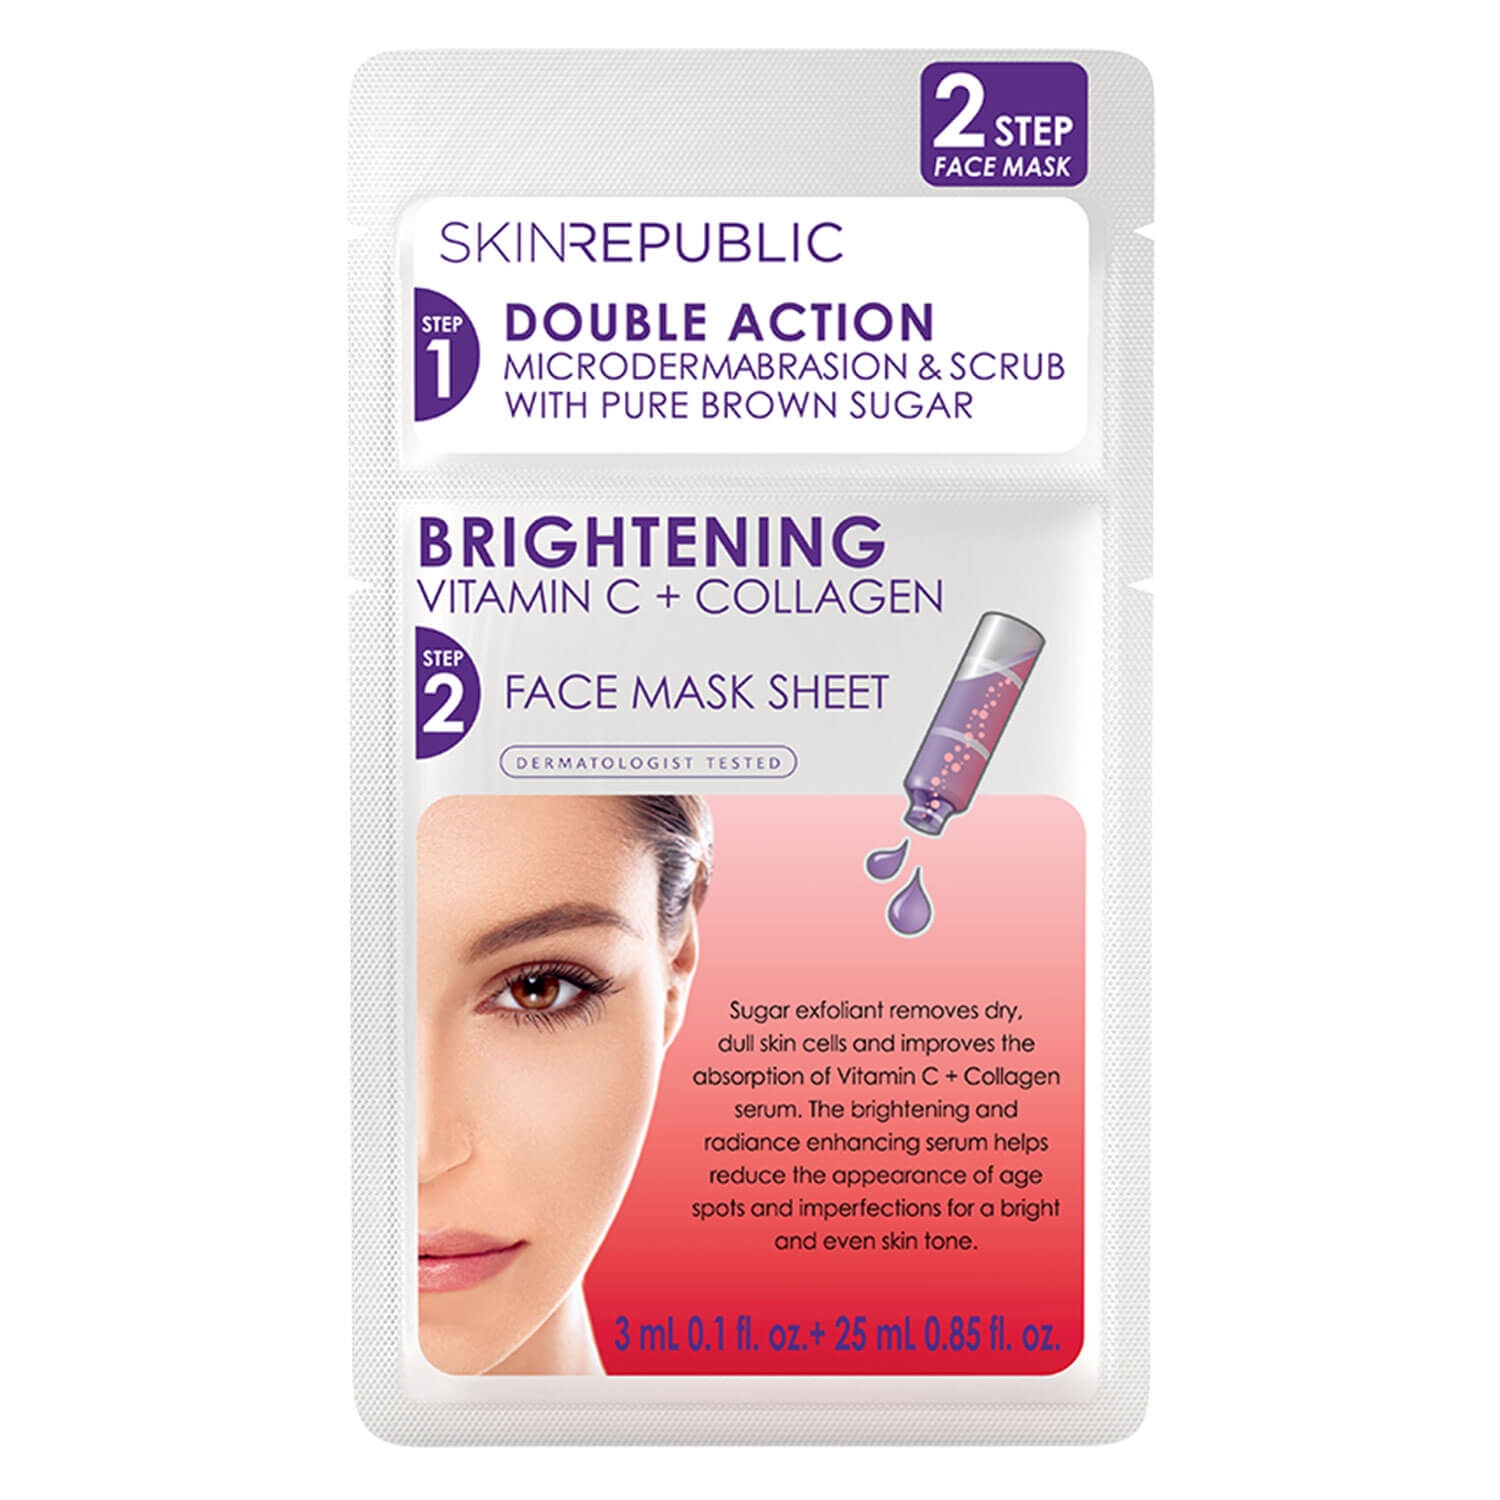 Product image from Skin Republic - 2 Step Brightening Vitamin C + Collagen Face Mask